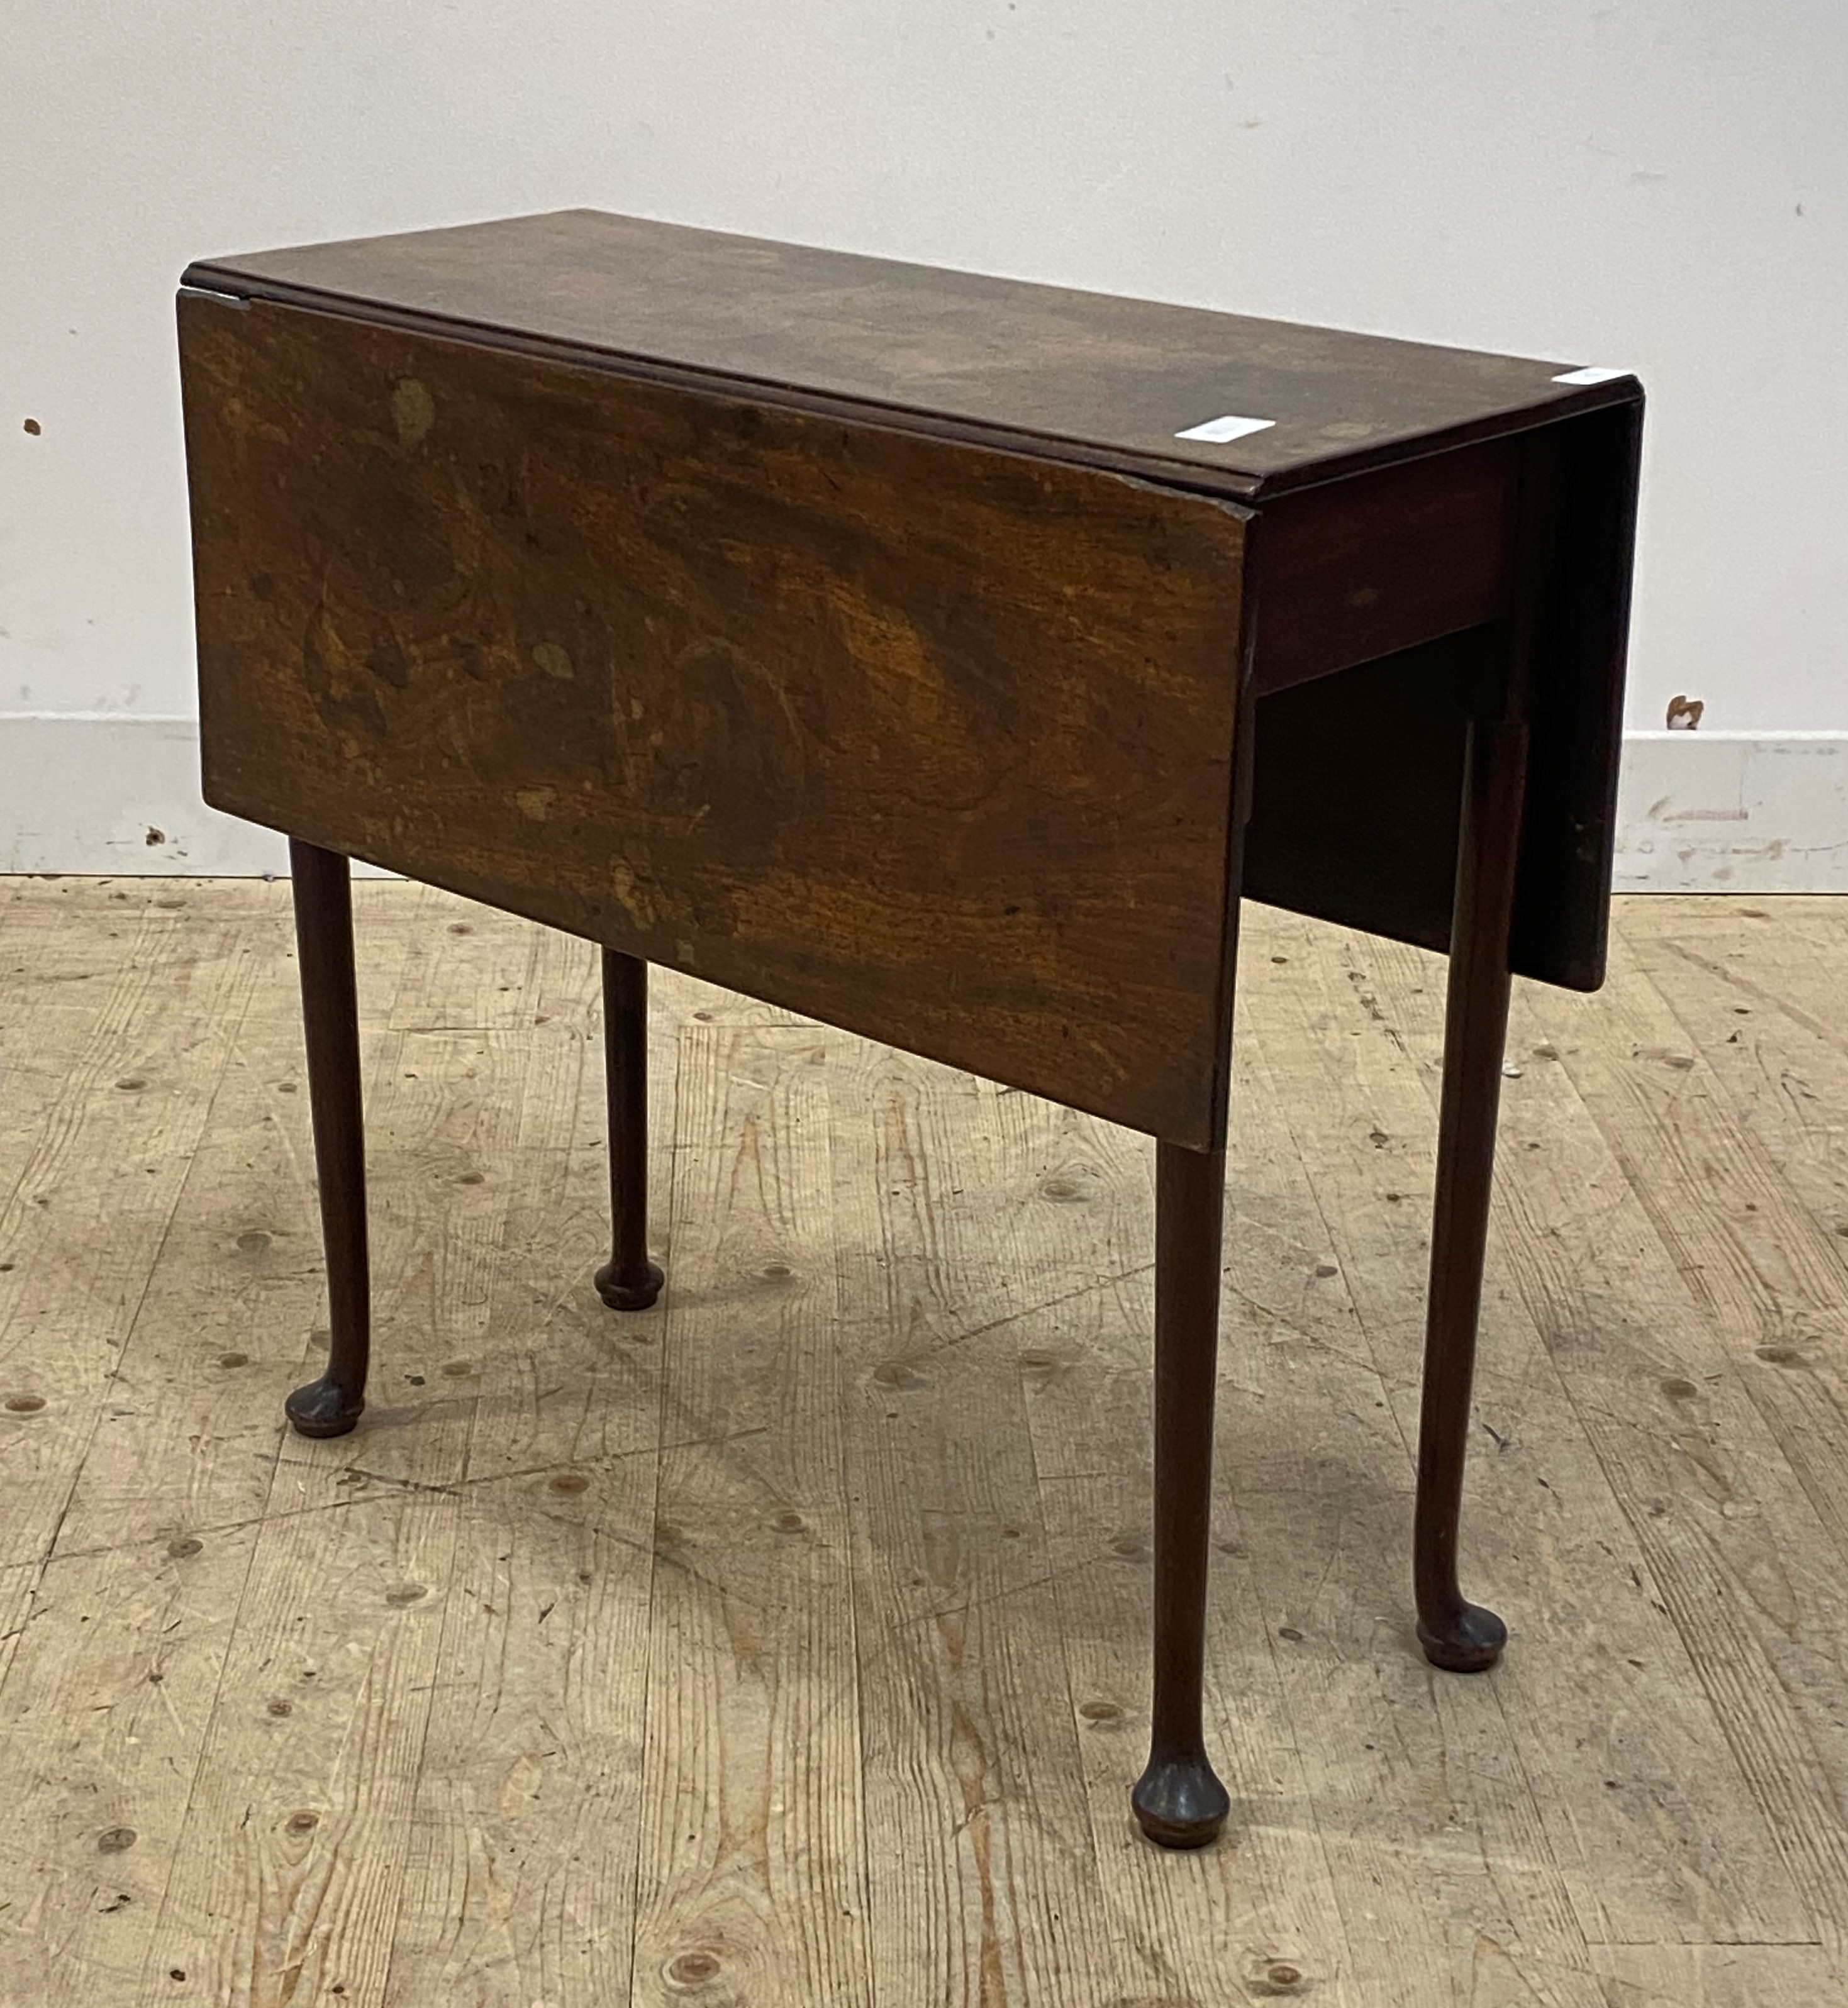 A George III mahogany side table, the two drop leaves supported on turned swing legs with pad